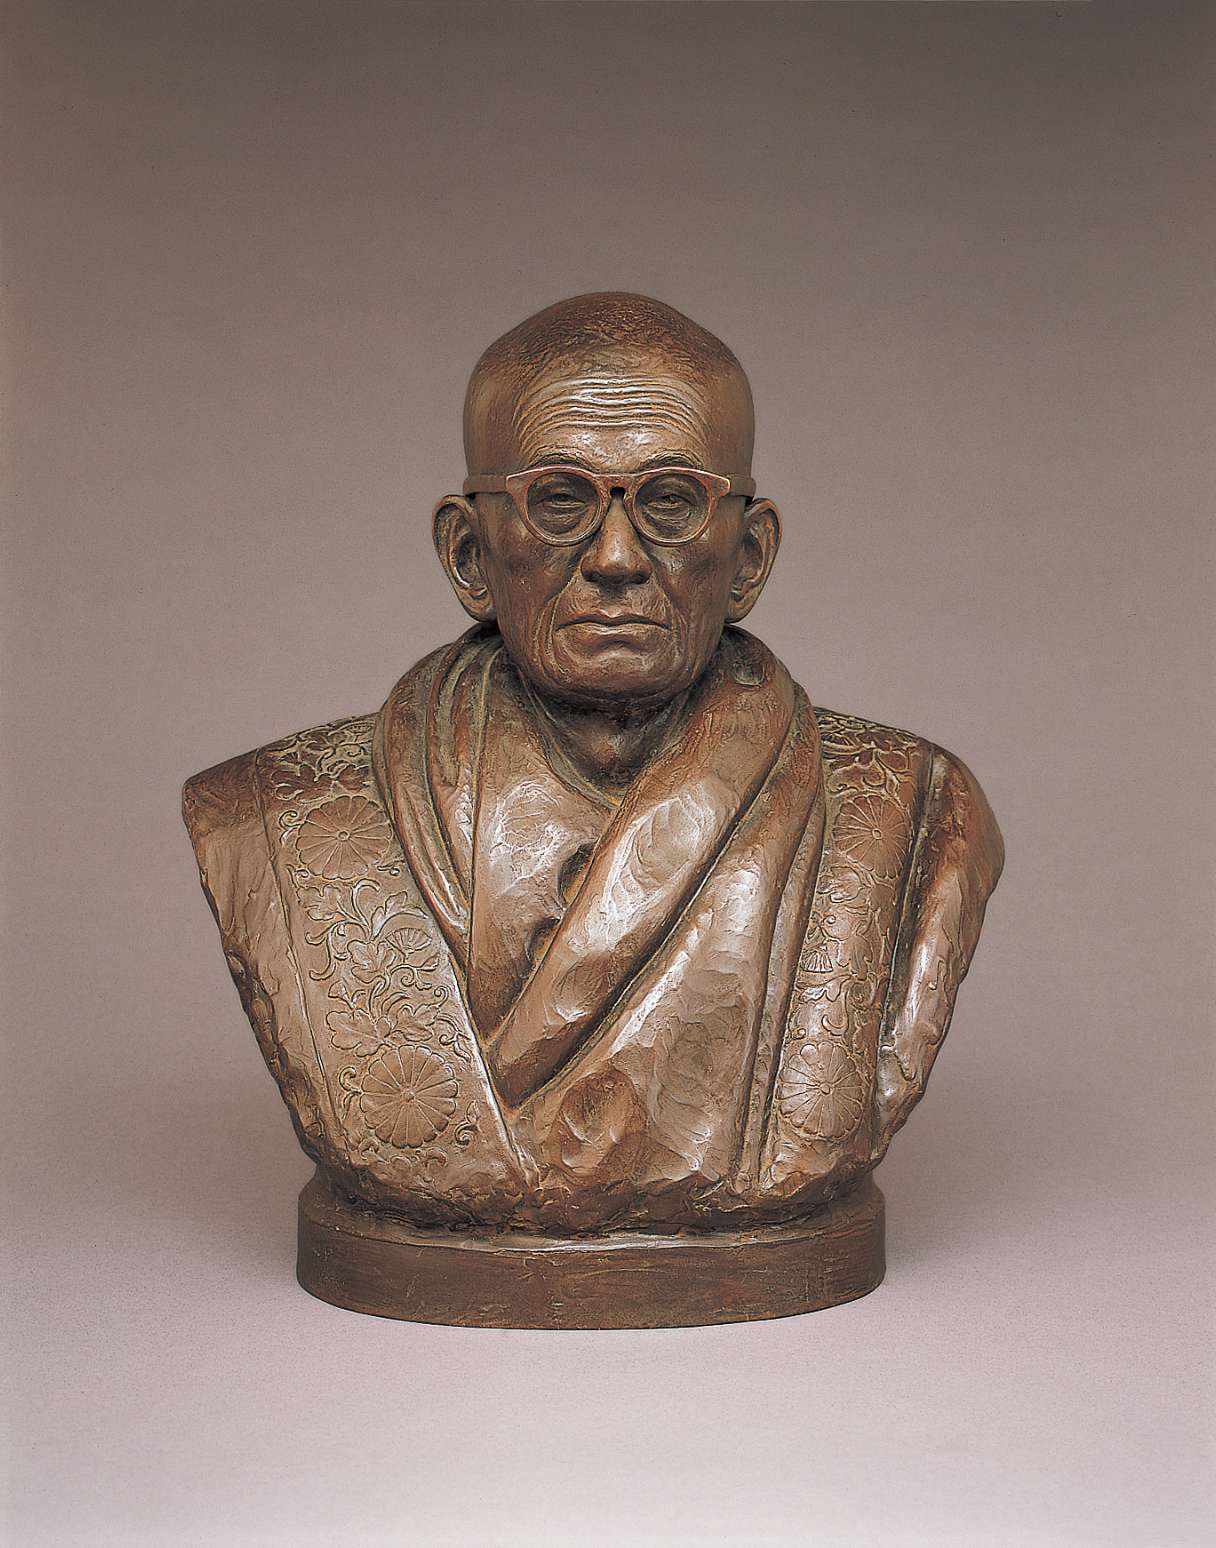 A brown hued bust of an elderly, bald Japanese man wearing horn-rimmed glasses with round frames; his face wise and lined, he wears voluminous robes over his shoulders, etched with floral designs.